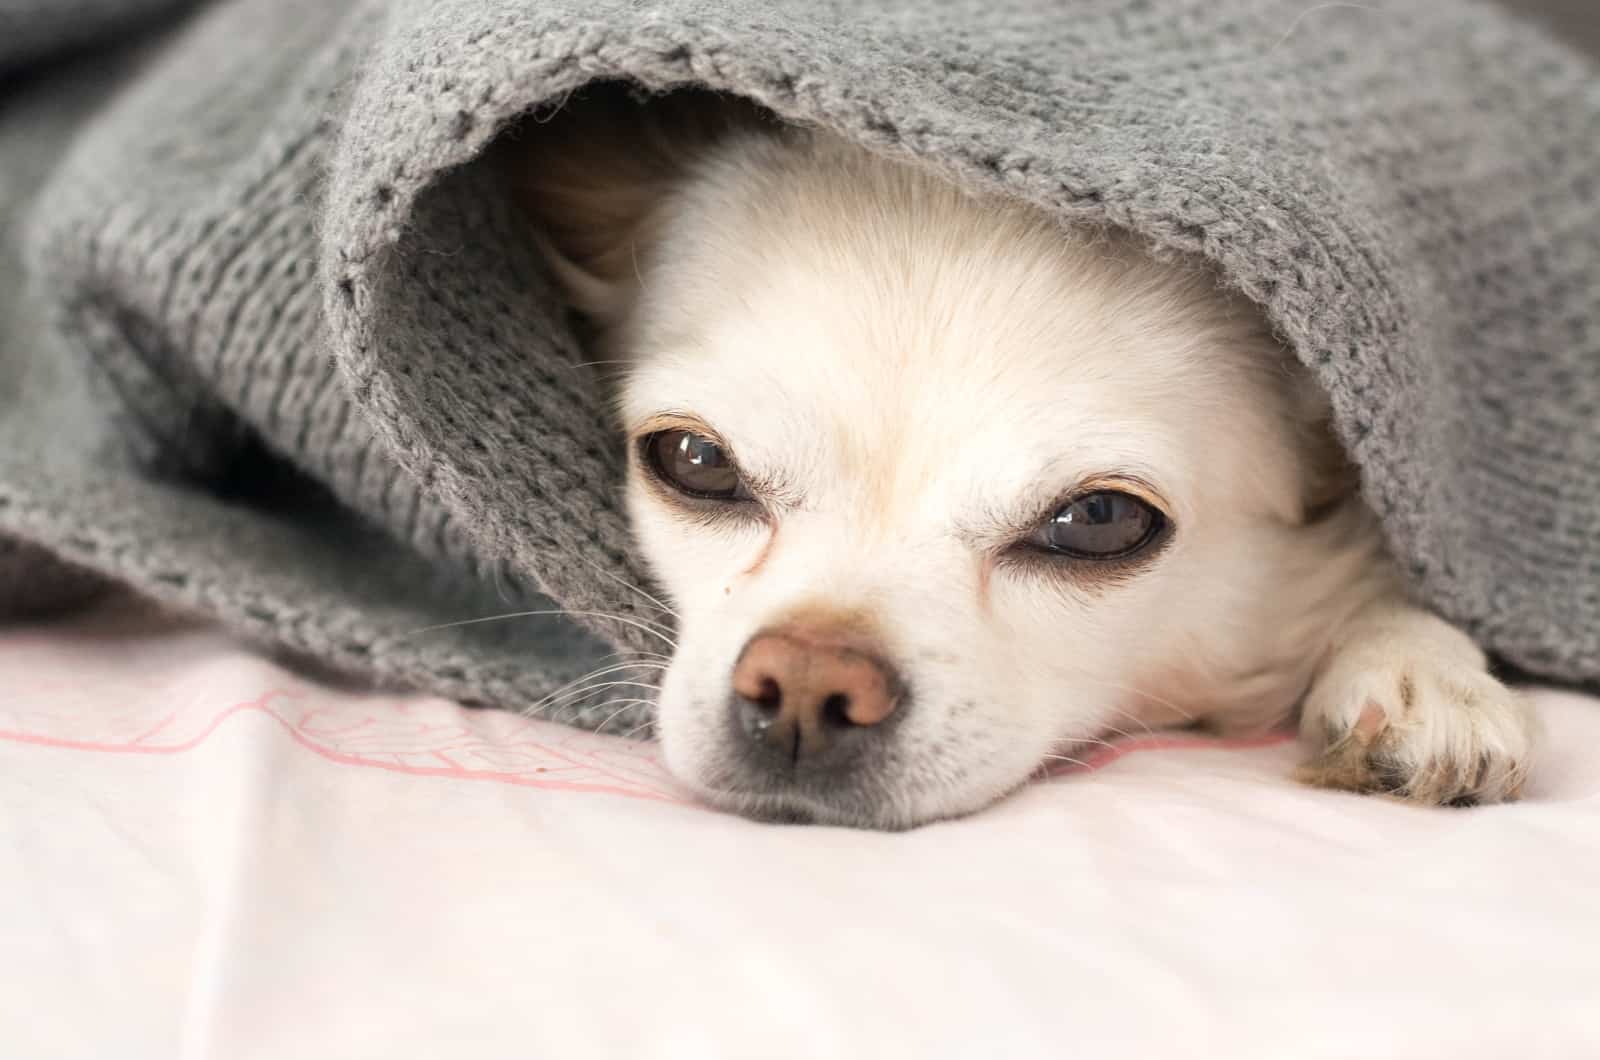 Chihuahua wrapped up in blanket